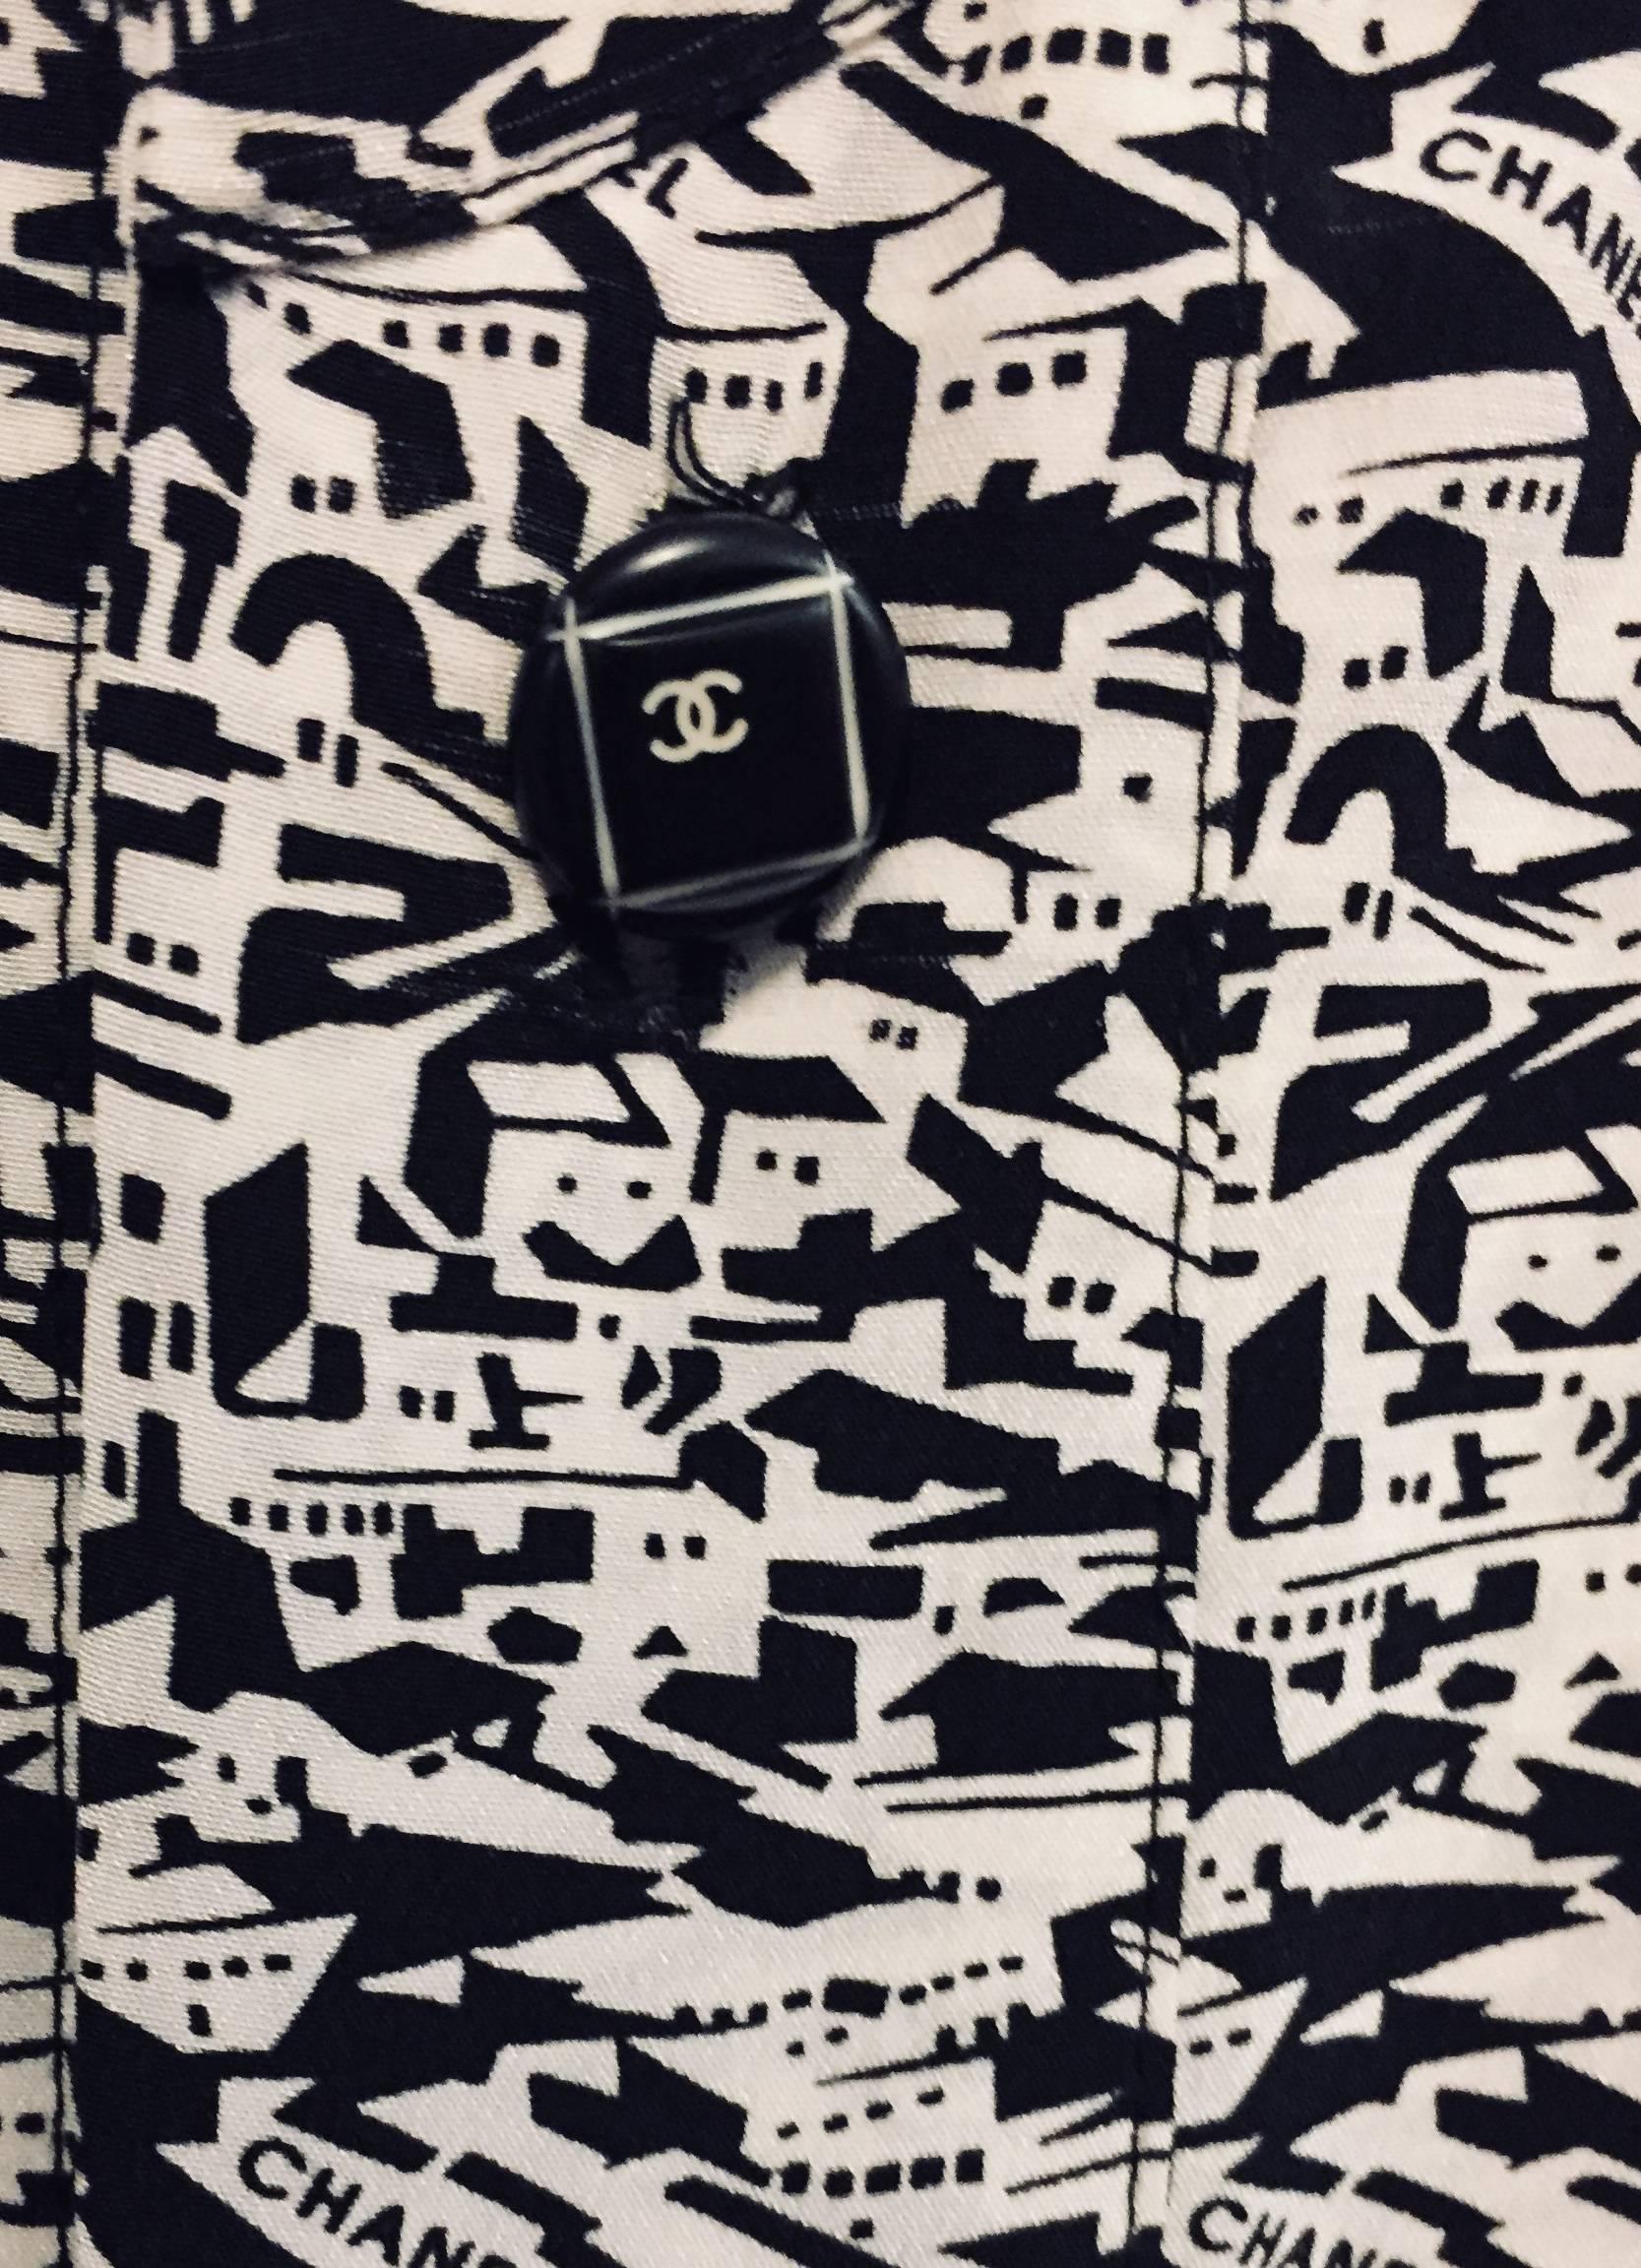 City Chanel Black and White City Print Silk Dress with Diverse Usage Scarf 2